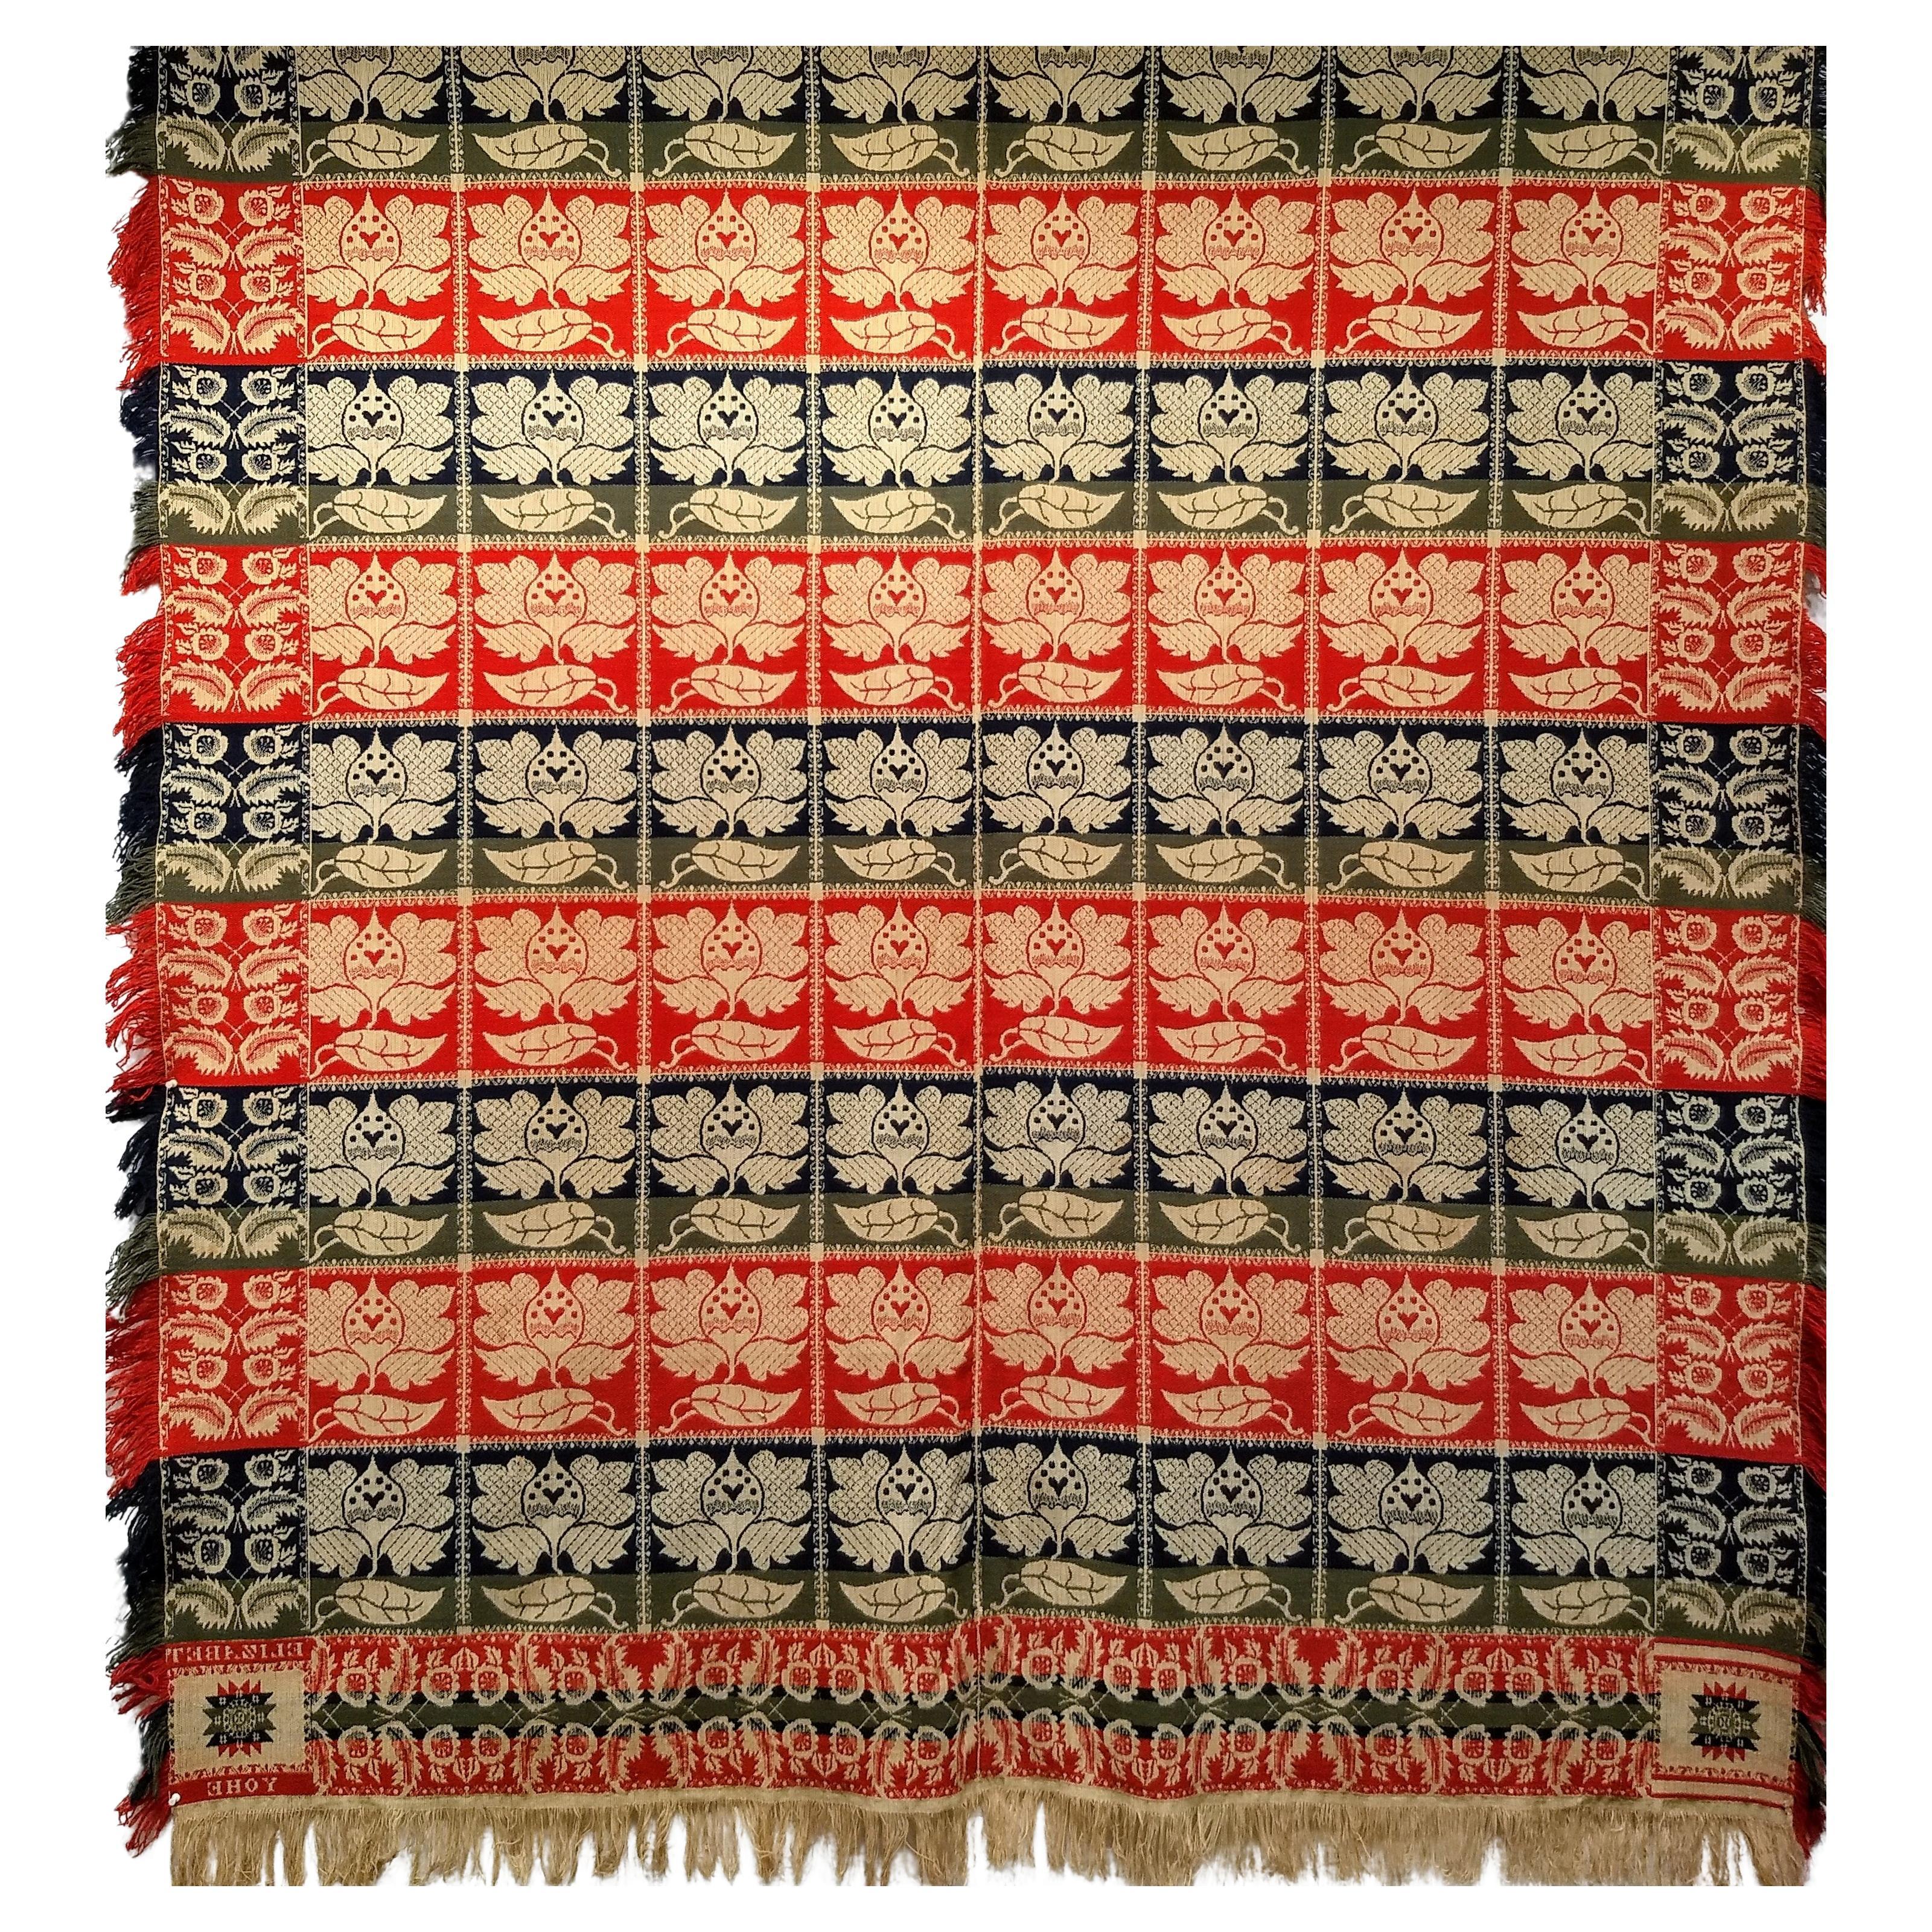 19th Century American Hand Woven Four Color Coverlet in Red, Navy, Green, Straw